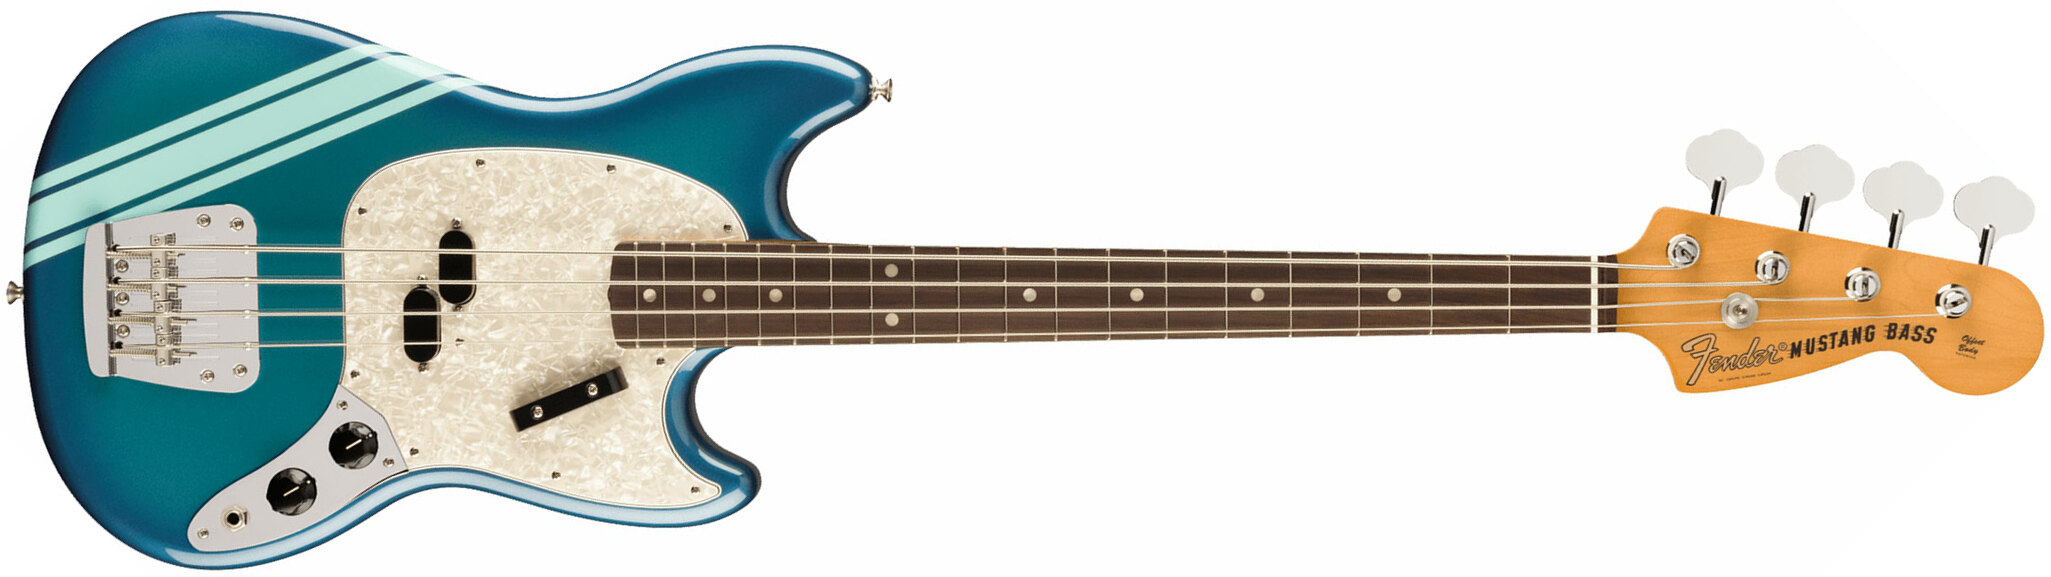 Fender Mustang Bass 70s Competition Vintera 2 Rw - Competition Blue - Solid body electric bass - Main picture